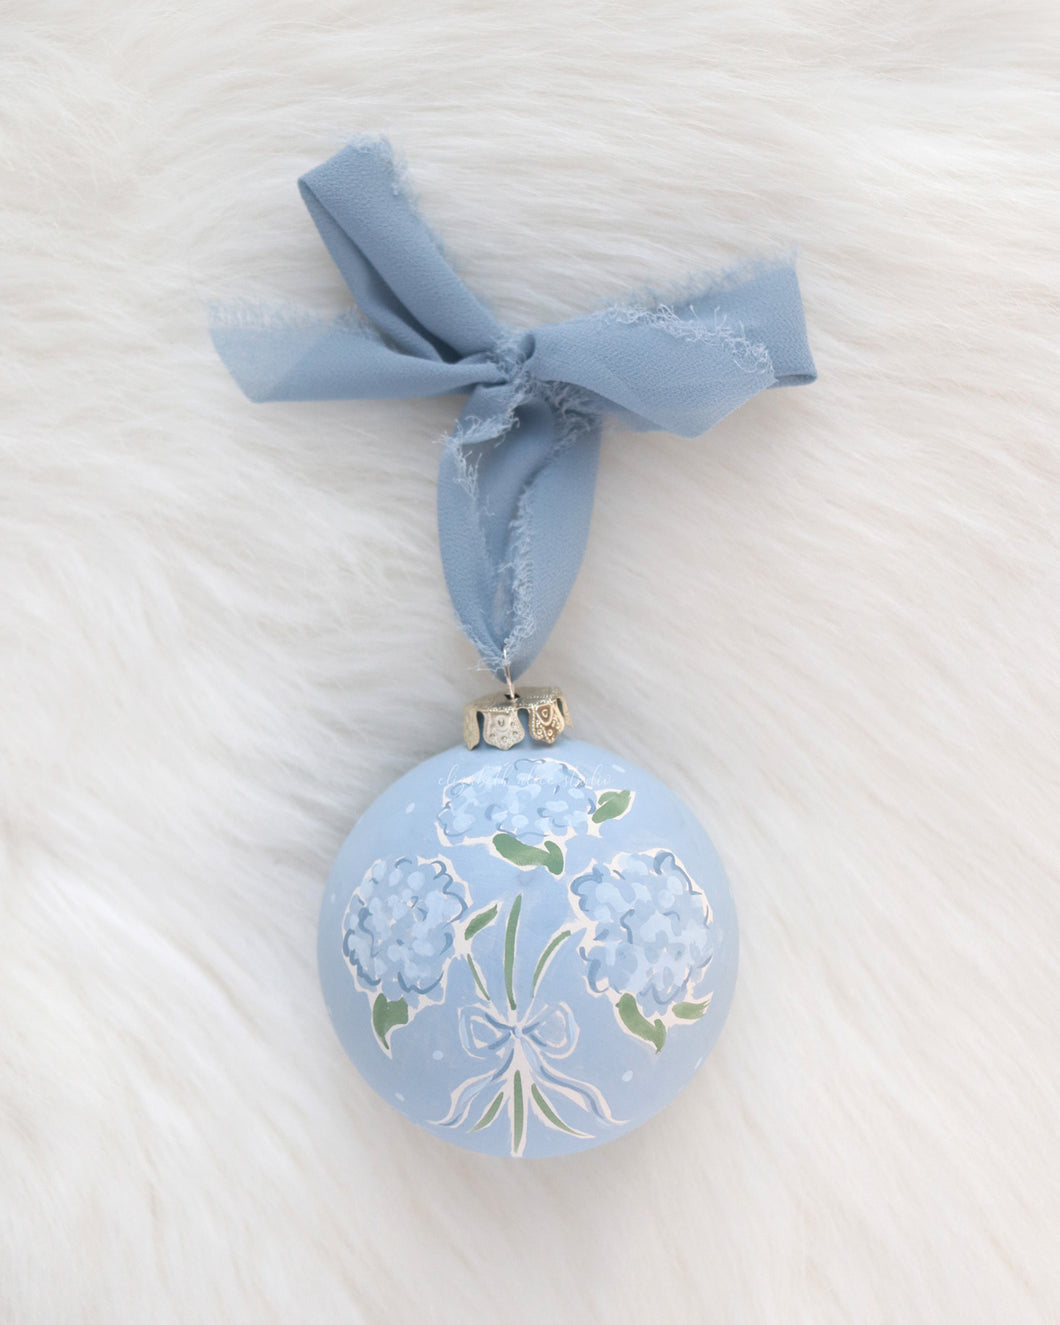 One-of-a-kind ornament: Blue hydrangea